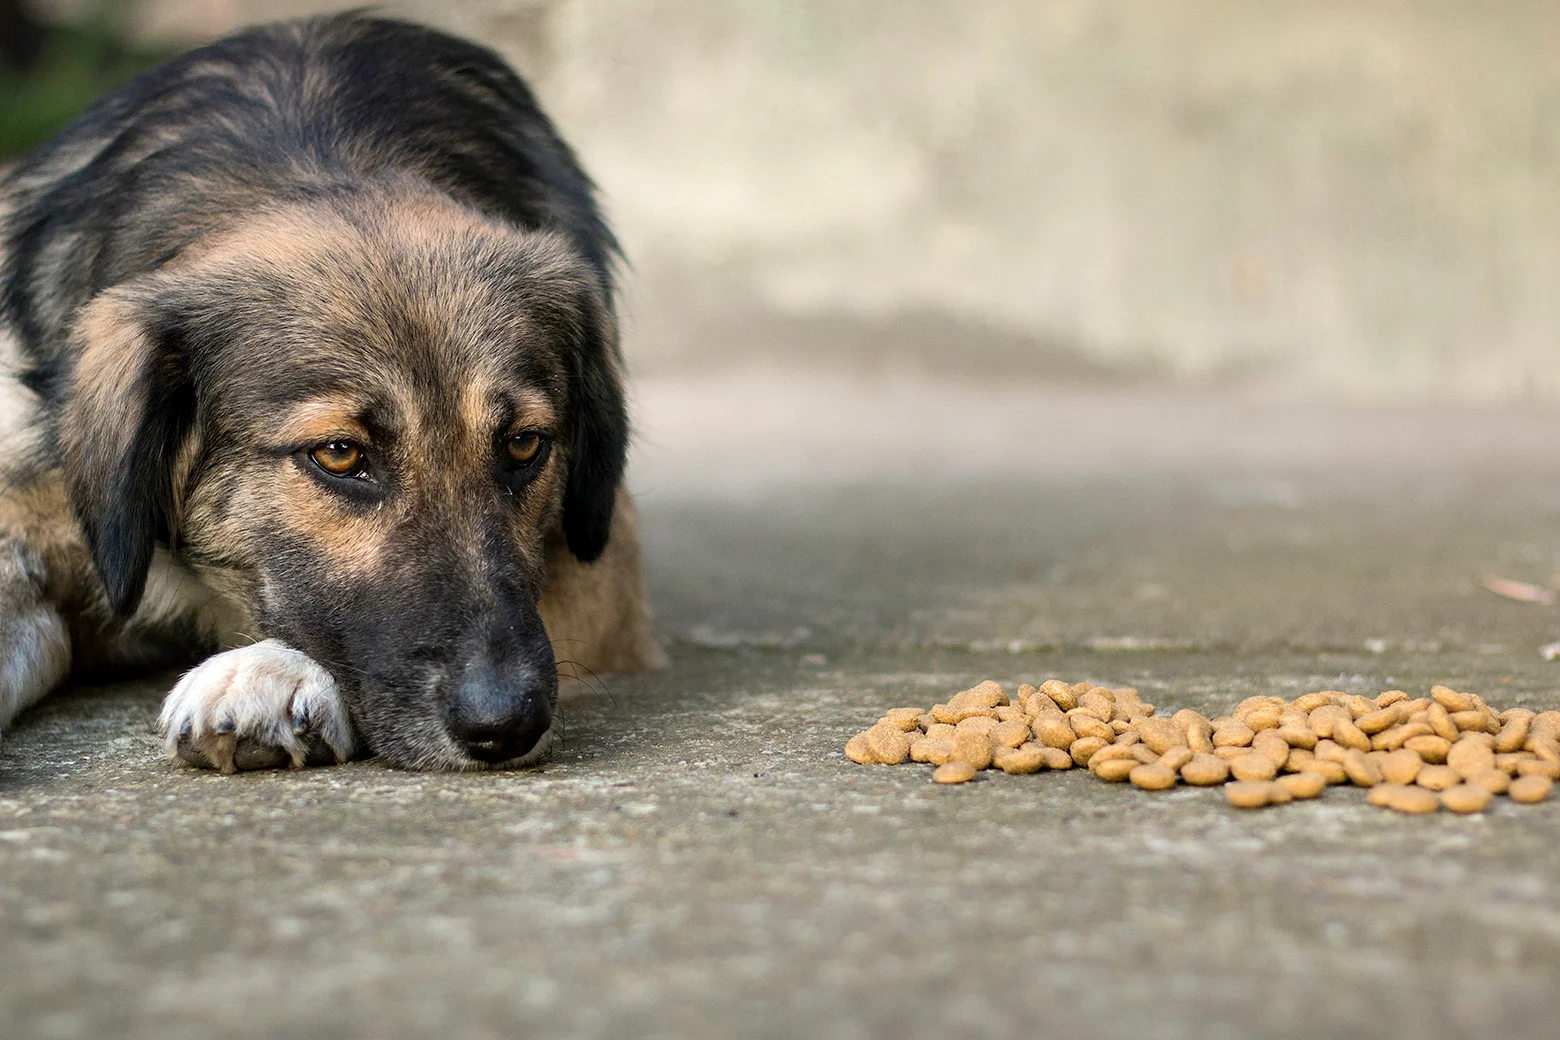 Foods That Are Bad for Dogs